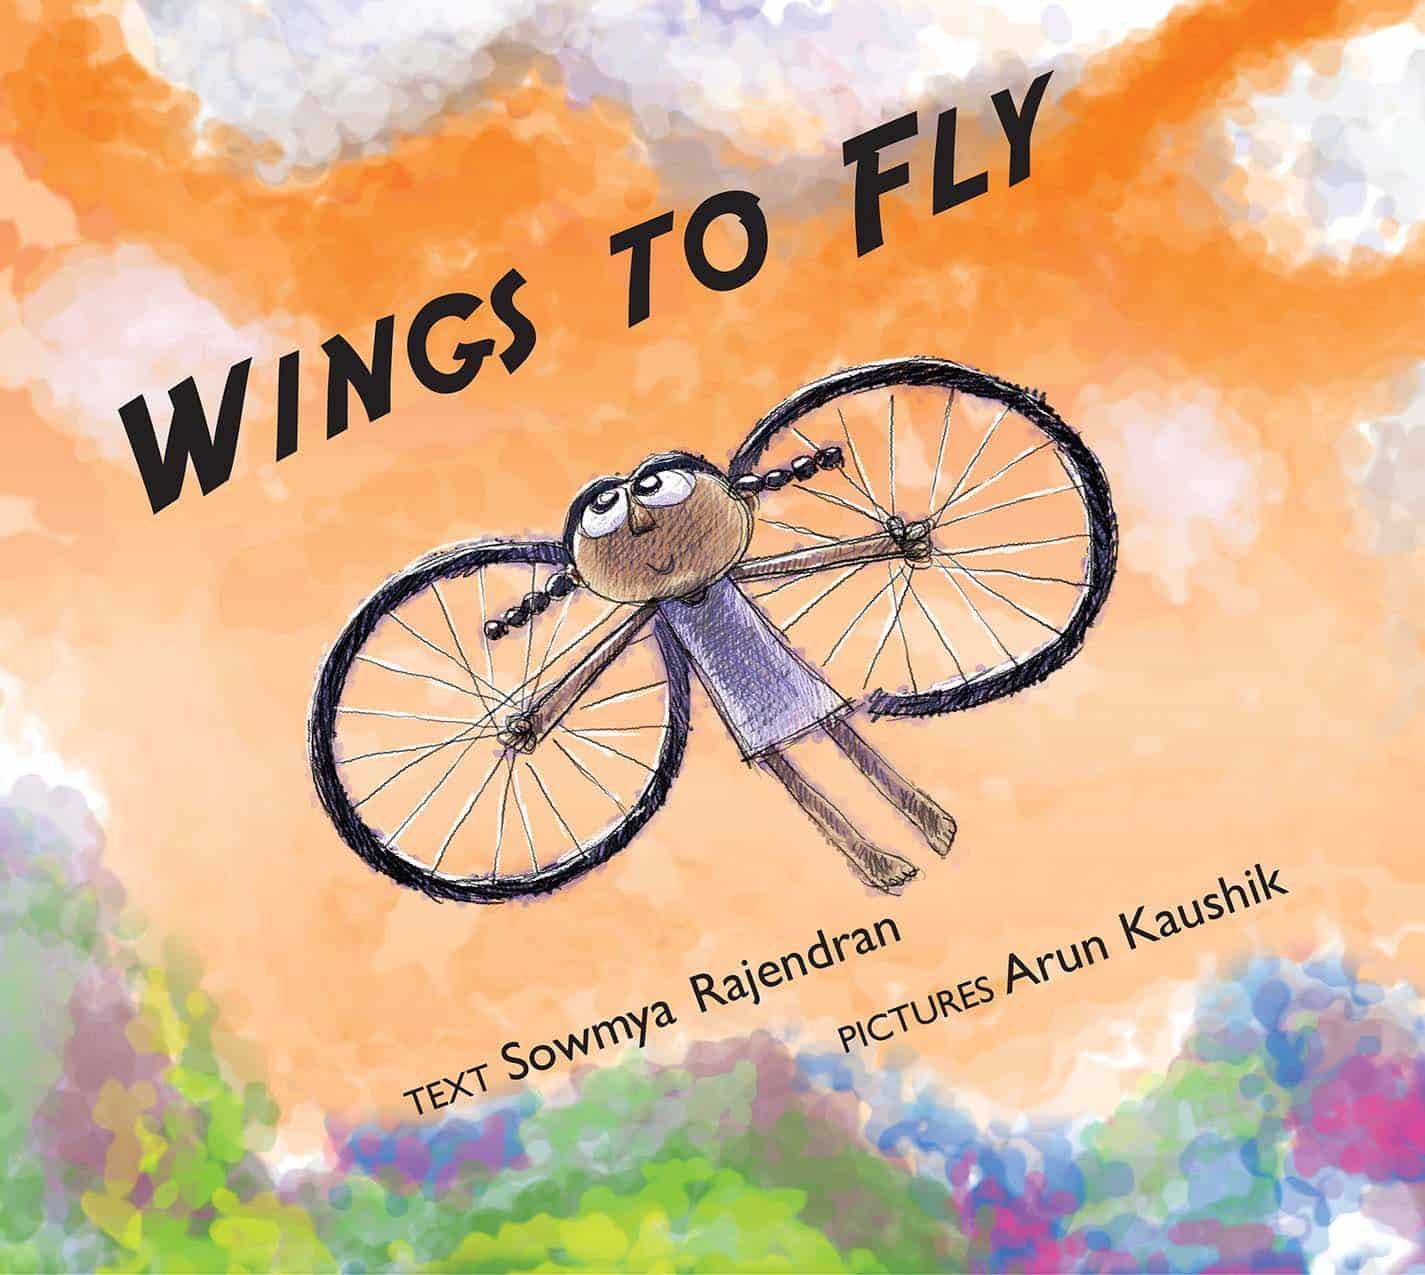 7 Inspiring Children's Books about Disabilities And Overcoming Challenges - Wings to Fly